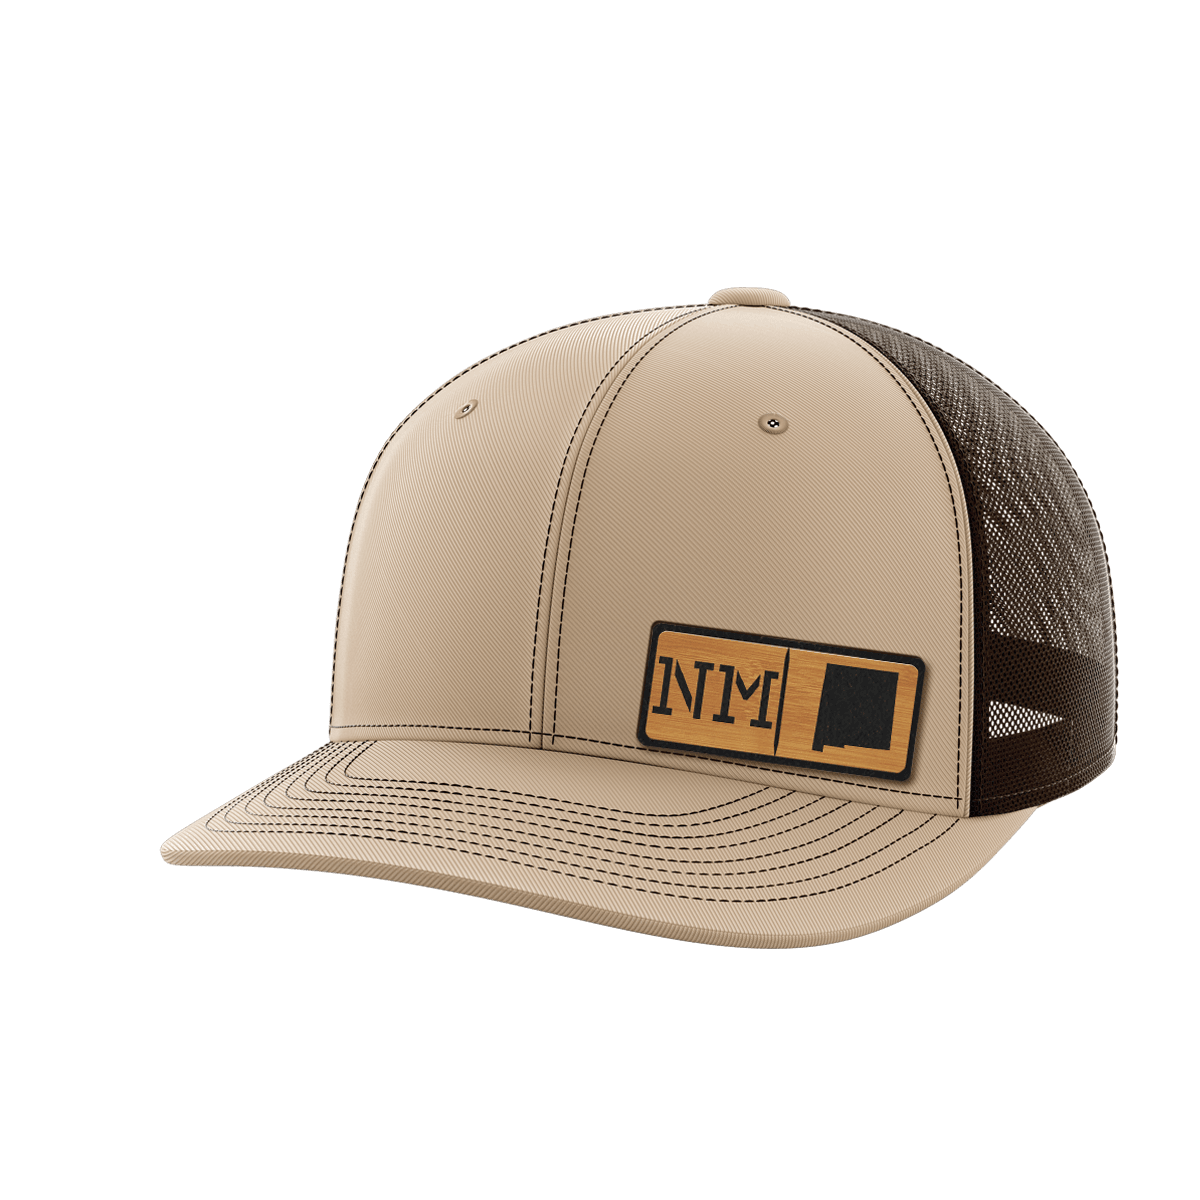 New Mexico Homegrown Hats - Greater Half